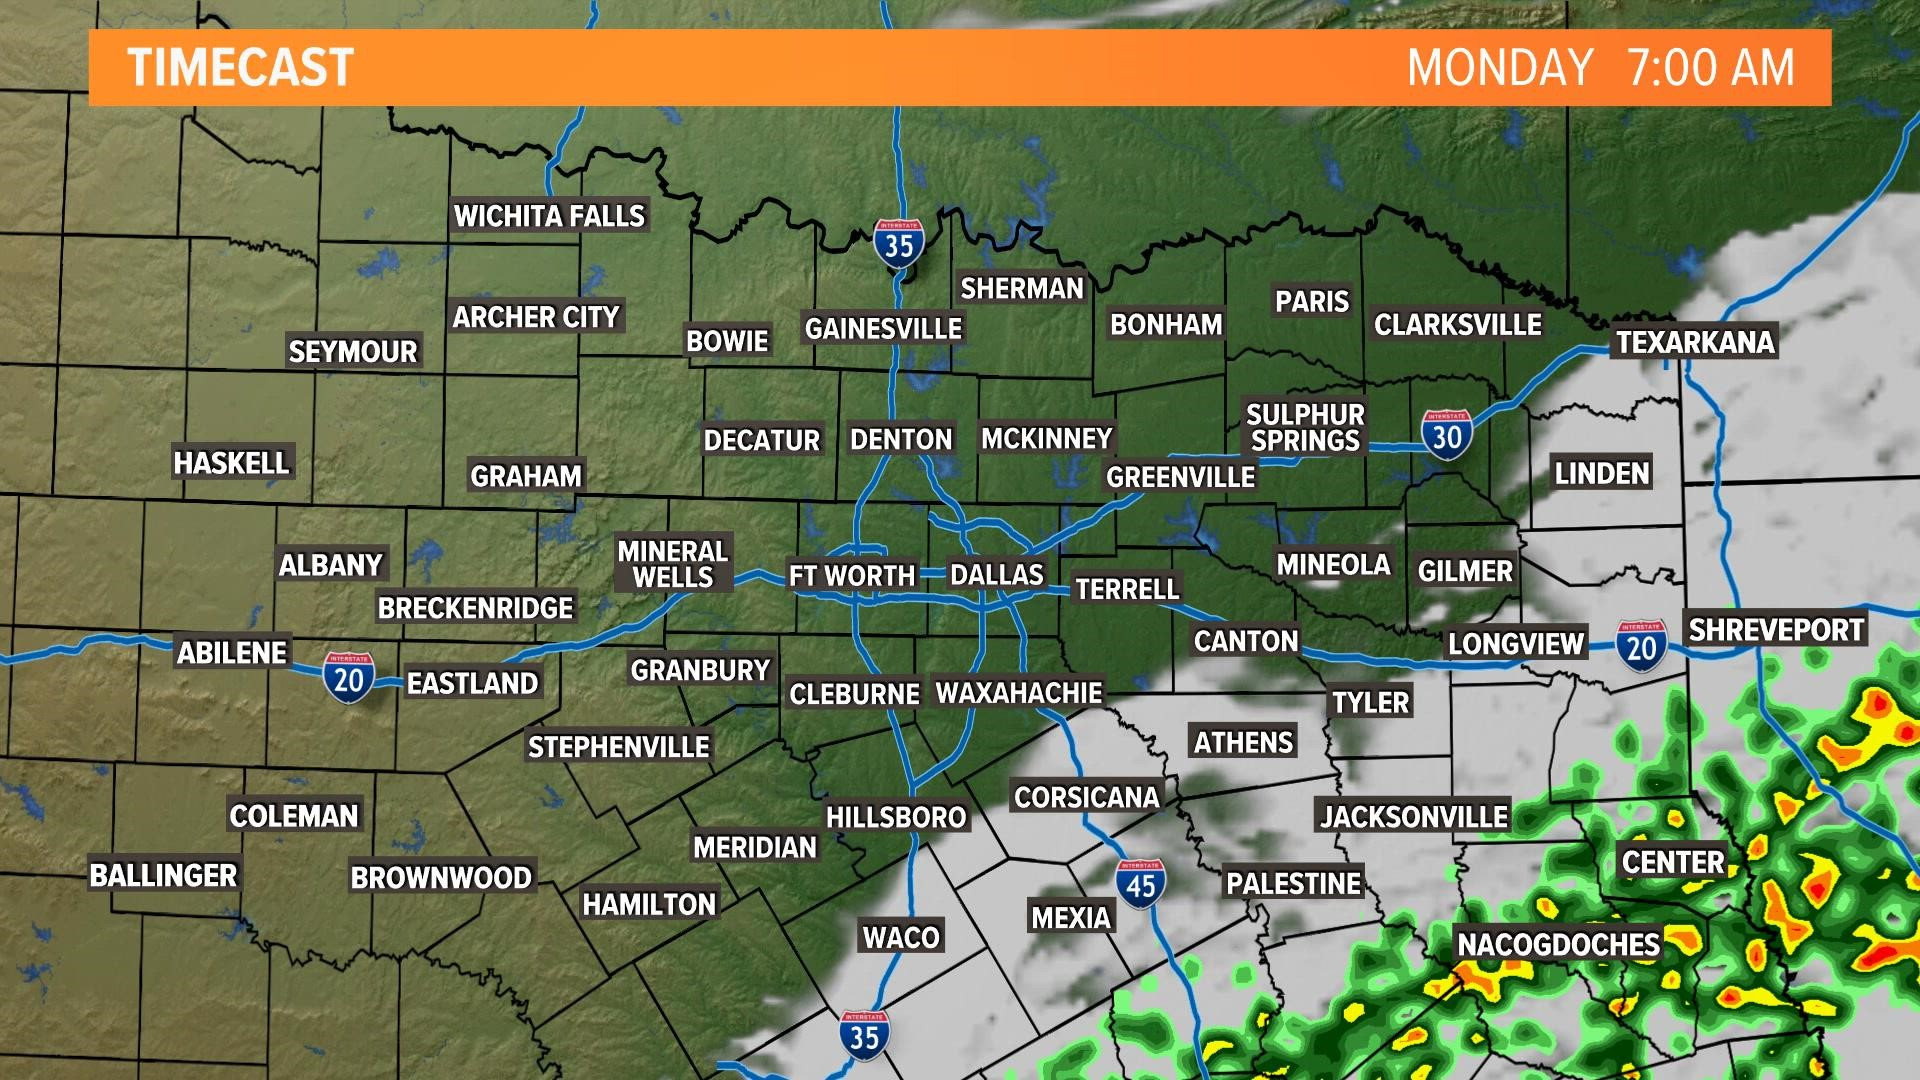 Showers and storms southeast of DFW early today along the cold front.